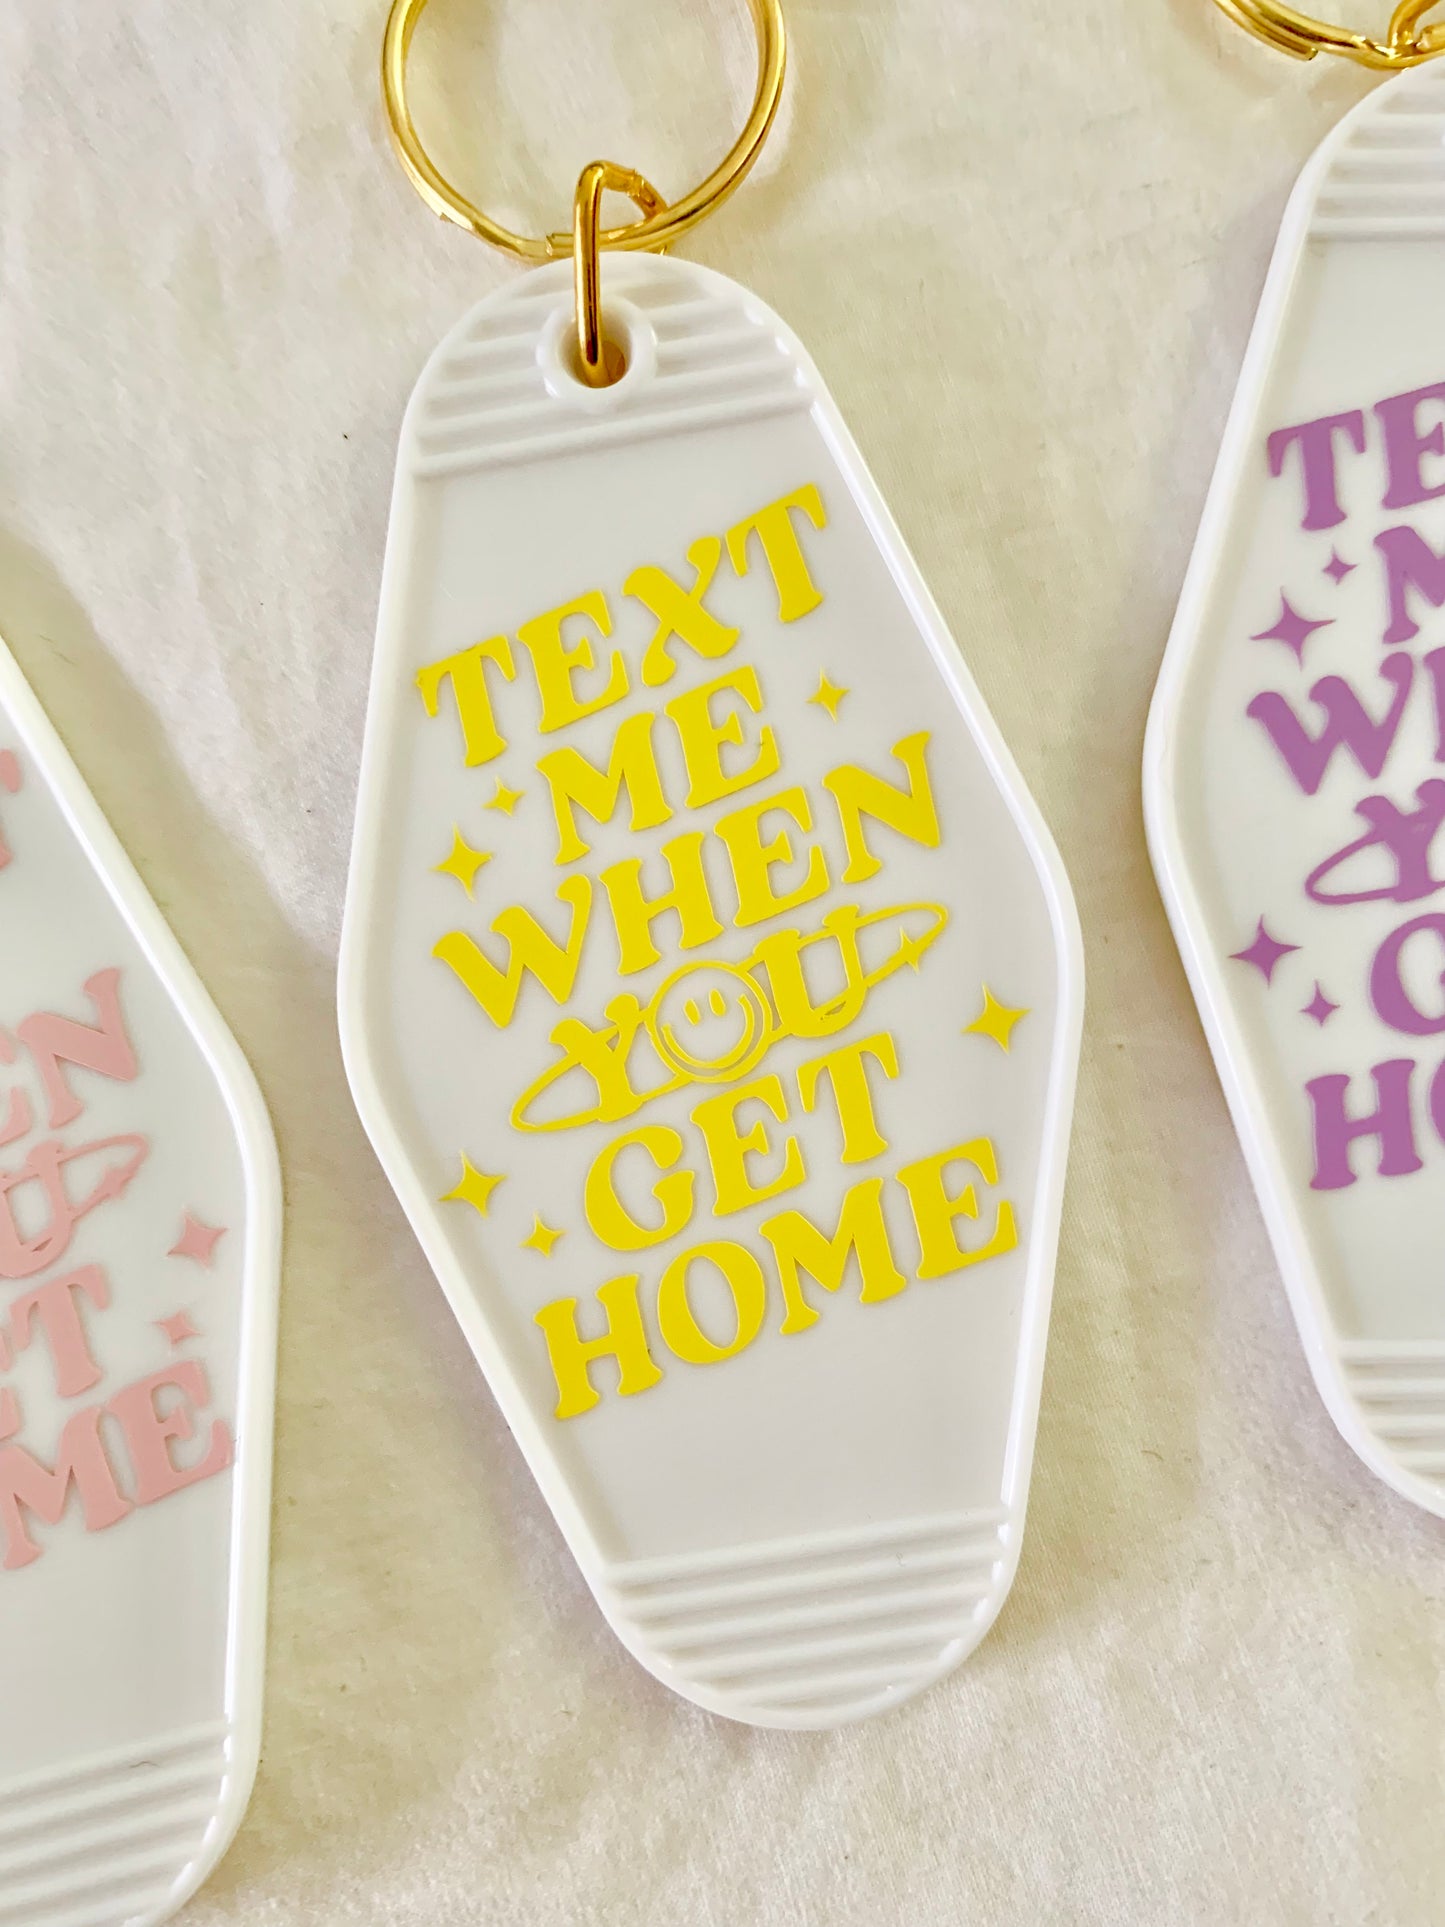 "Text Me When You Get Home" | Retro Motel Keychain